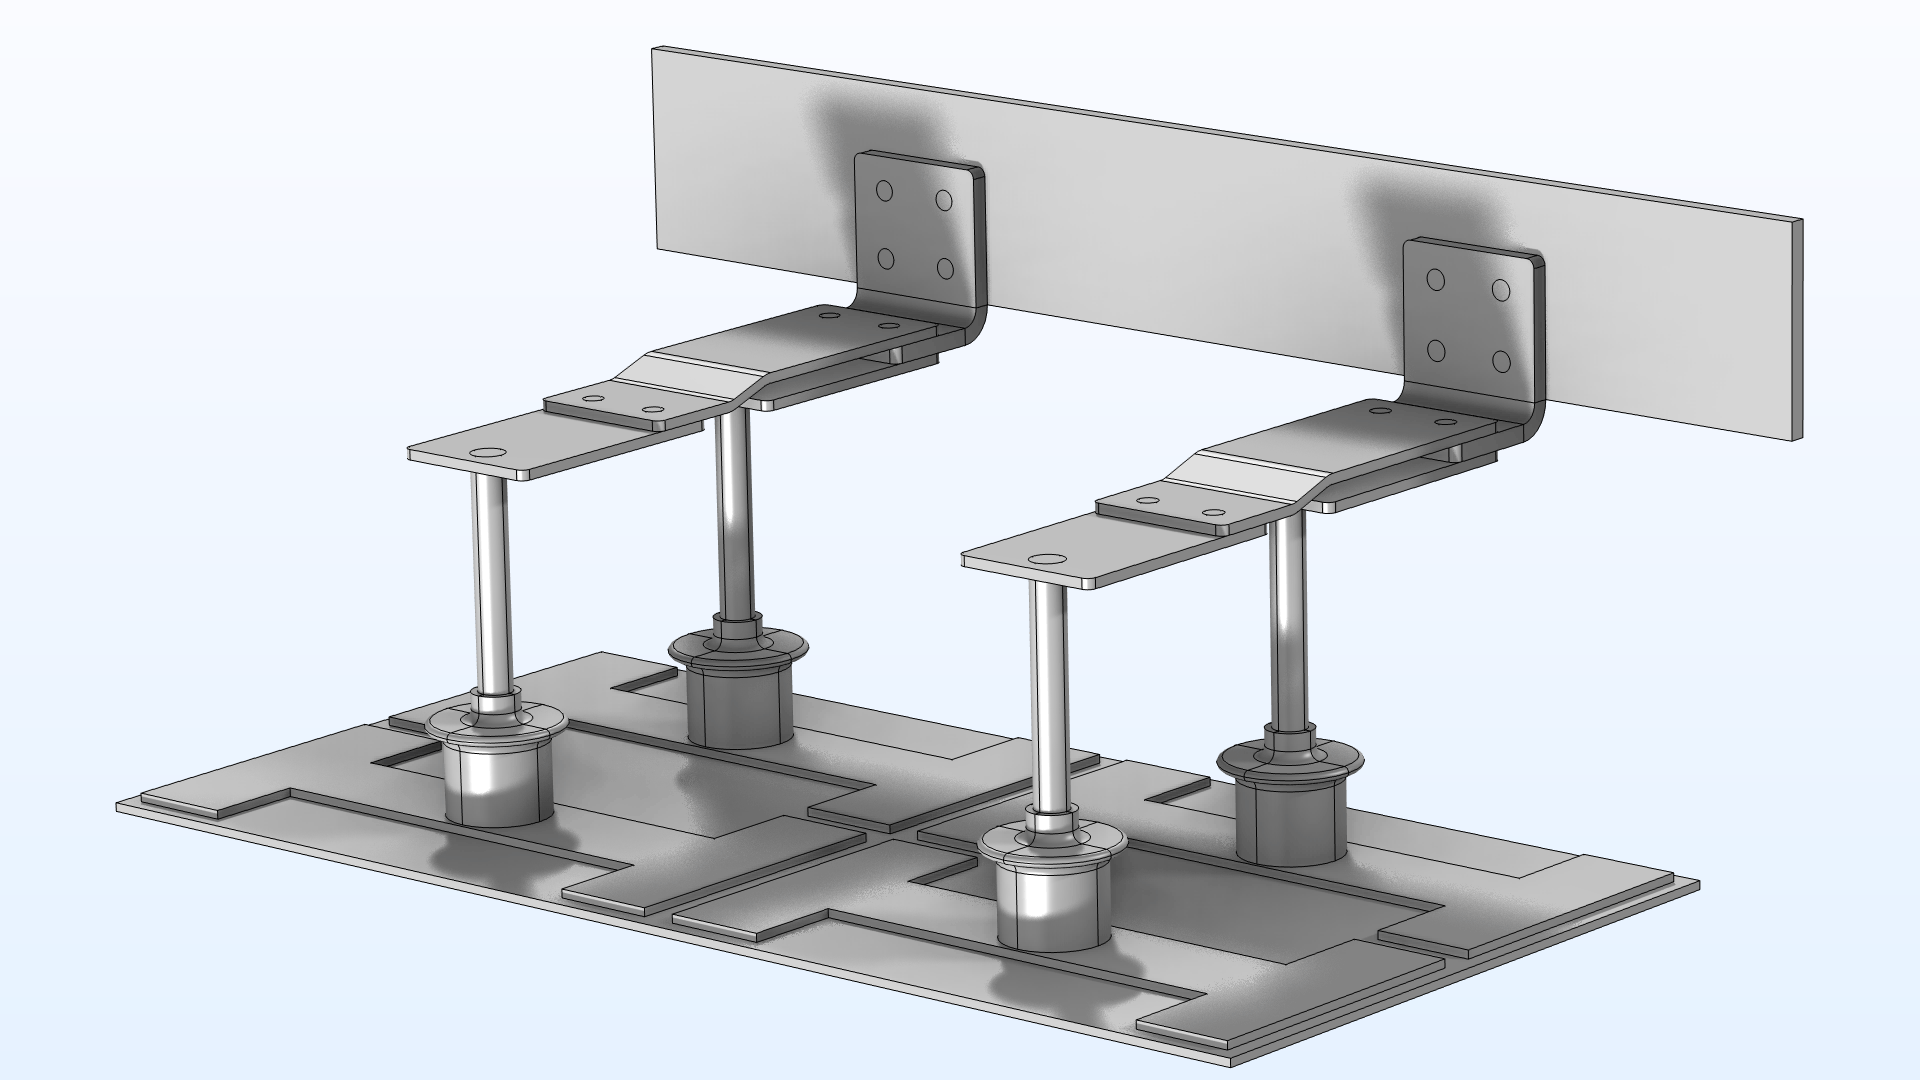 The busbar model from the Busbar Assembly Geometry Tutorial Series, organized by group nodes.